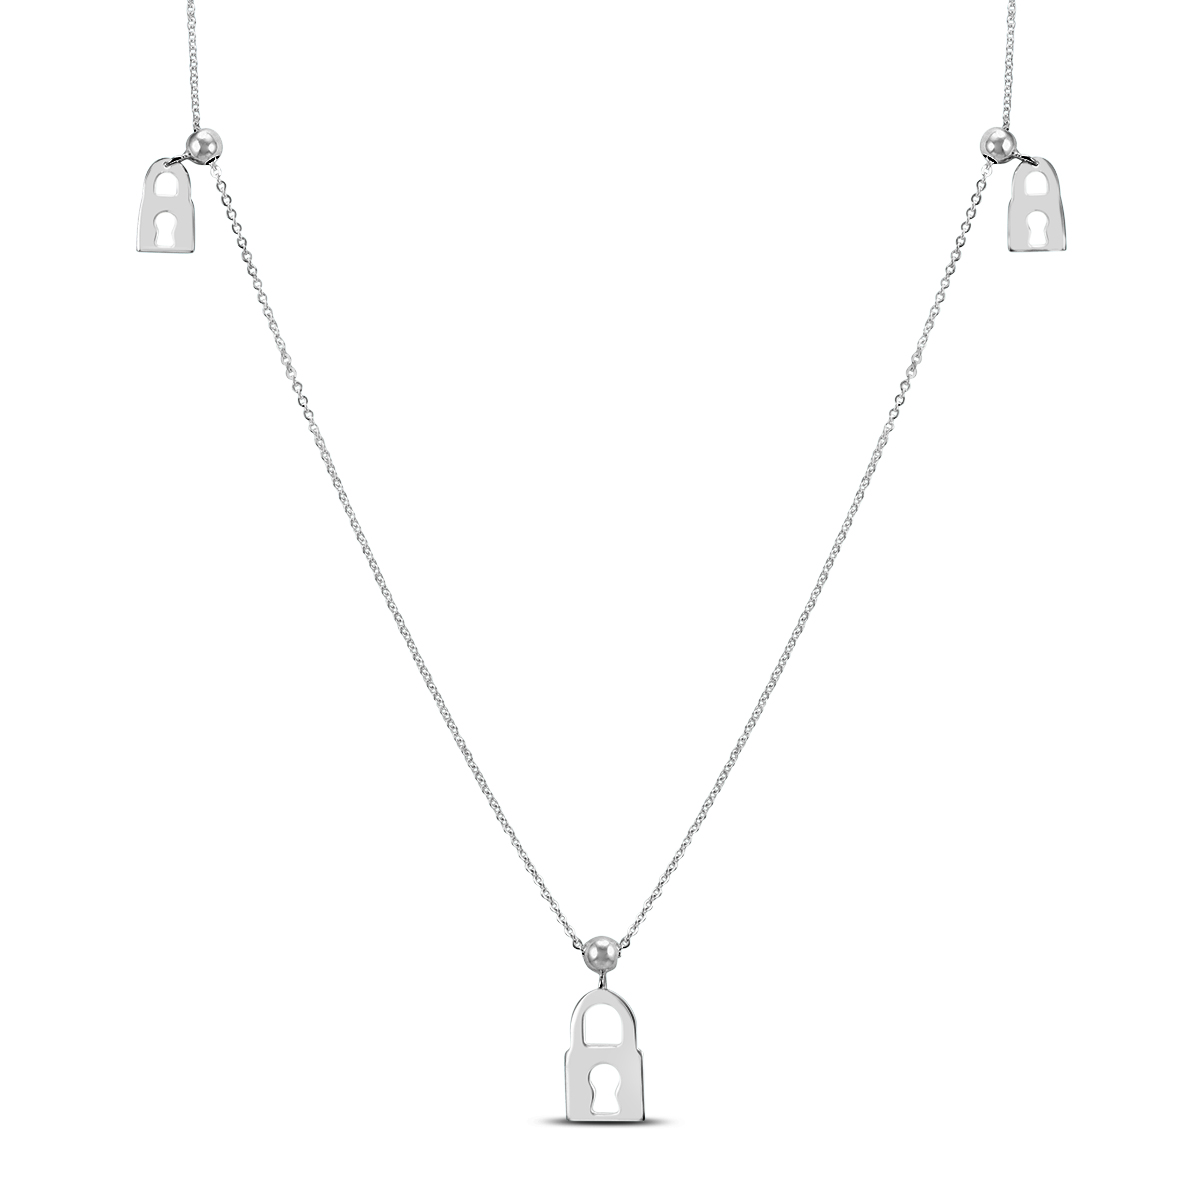 Lock Charm Necklace in .925 Sterling Silver